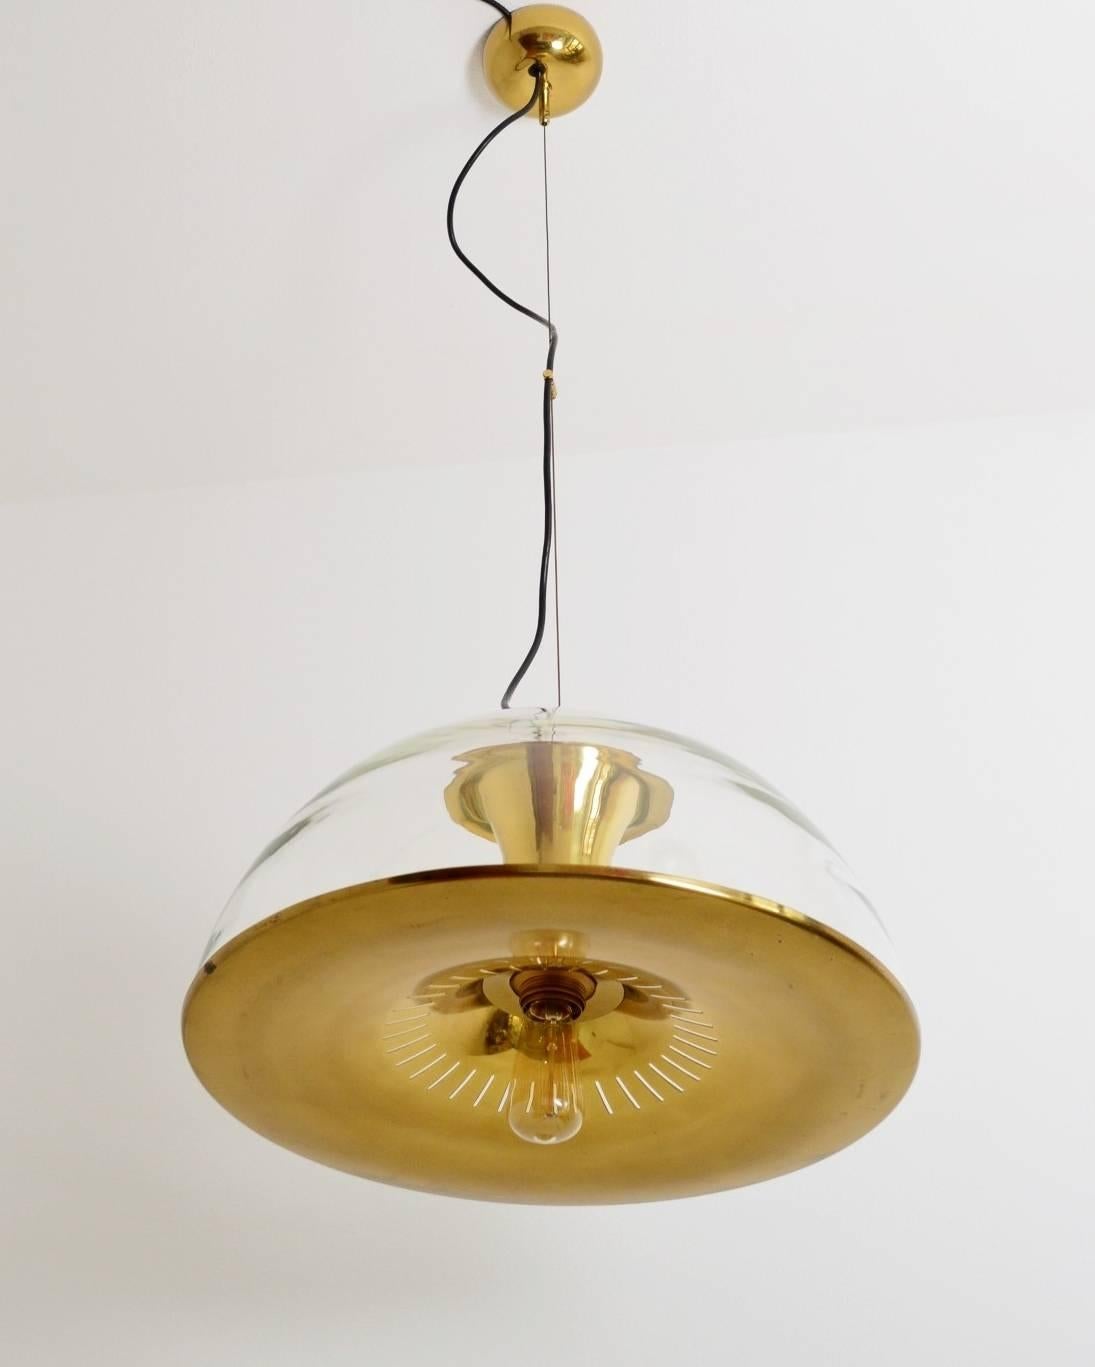 Beautiful particular glass dome pendant lamp with shiny brass parts with fantastic dark patina.
Hollywood Regency Style
The lower part of the lamp is made of full brass with thin slots, which are producing nice light effects.
The glass dome is